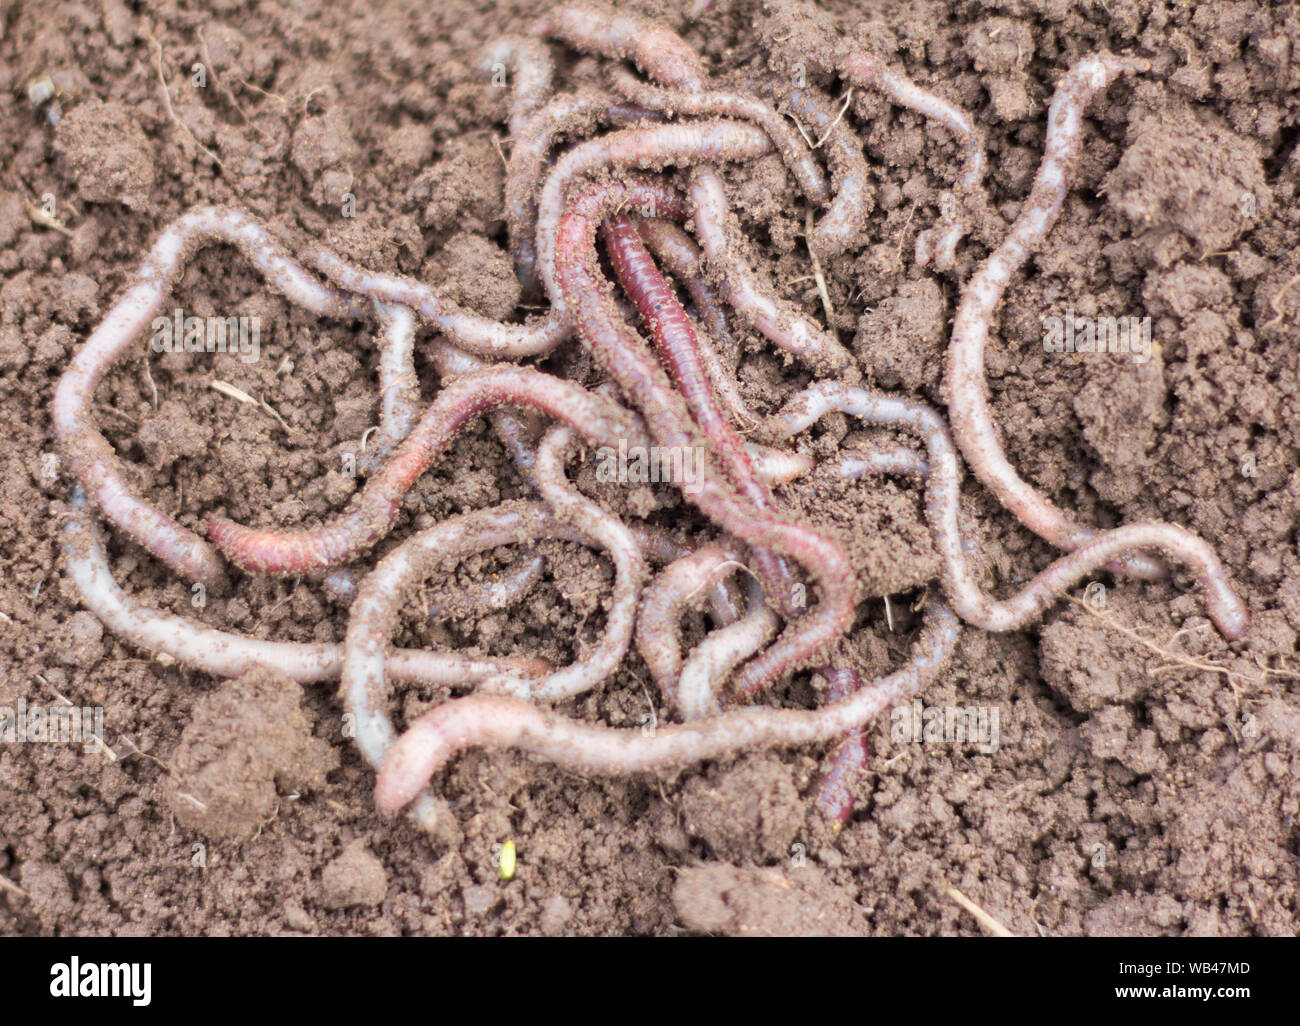 Macro shot of red worms Dendrobena in manure, earthworm live bait for  fishing Stock Photo - Alamy